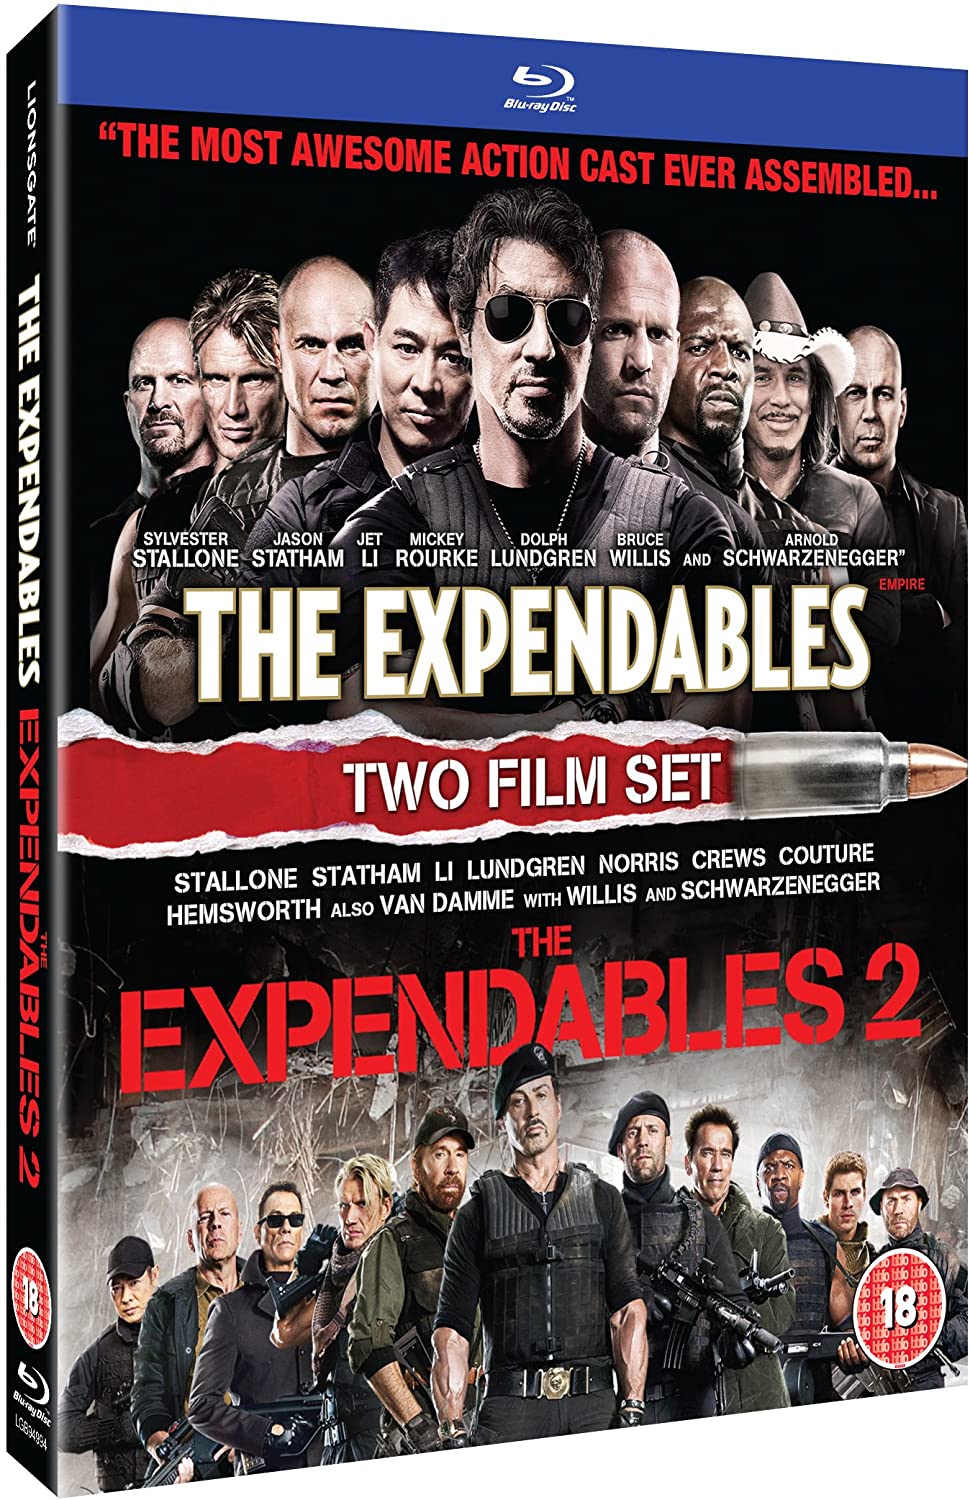 Expendables / The Expendables 2 [2013] - Action/Adventure [Blu-Ray]